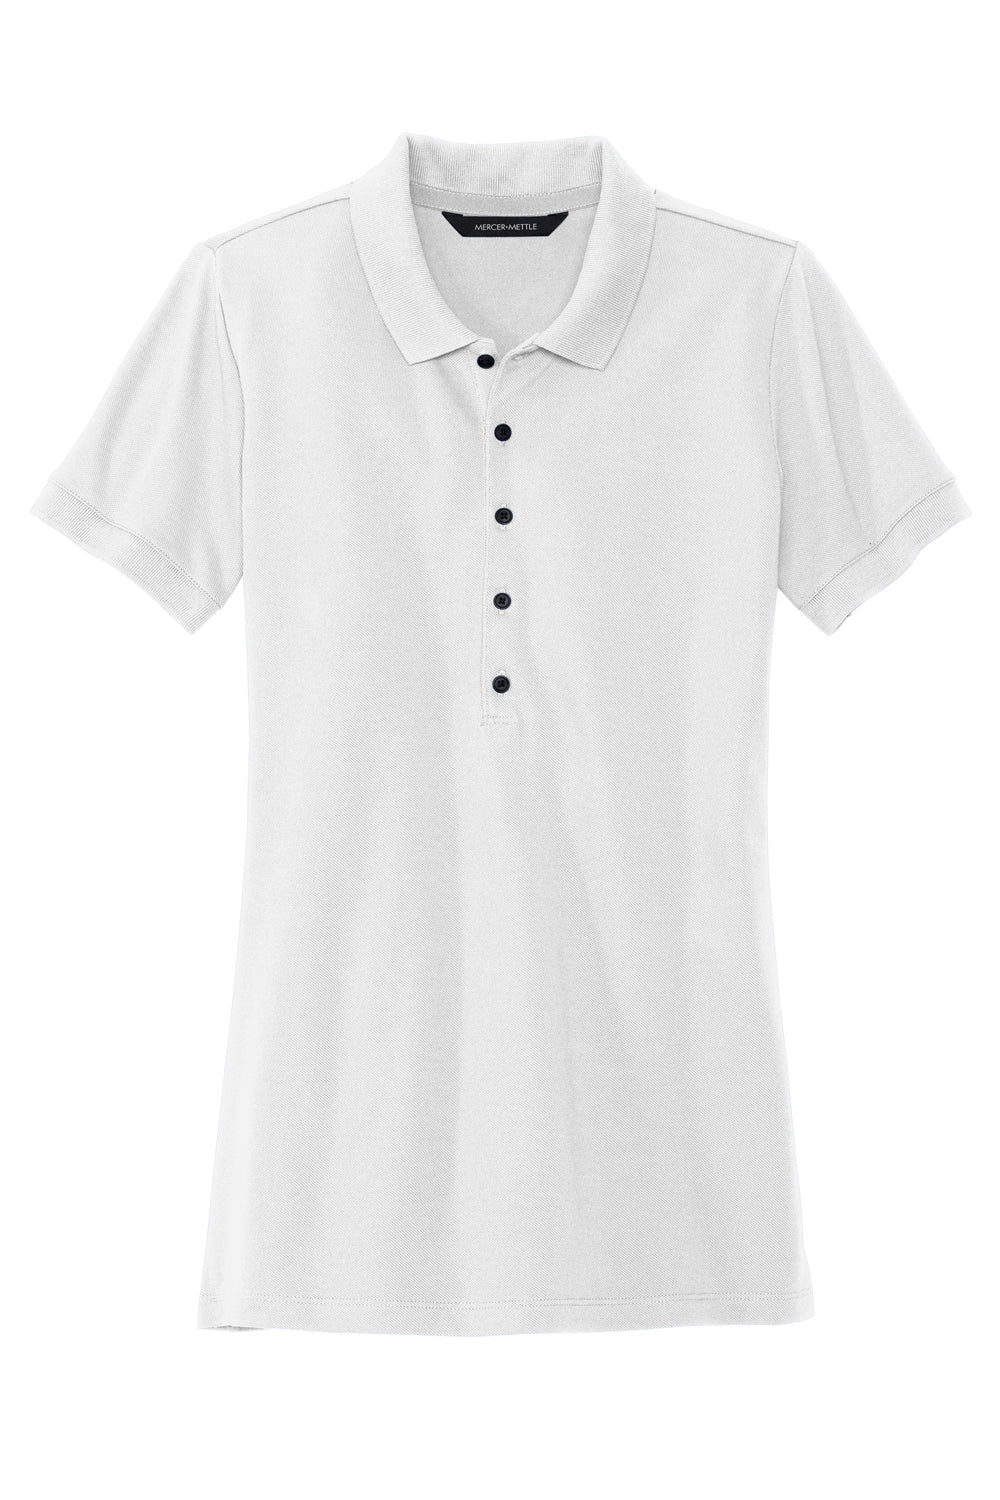 Mercer+Mettle MM1001 Stretch Pique Short Sleeve Polo Shirt White Flat Front